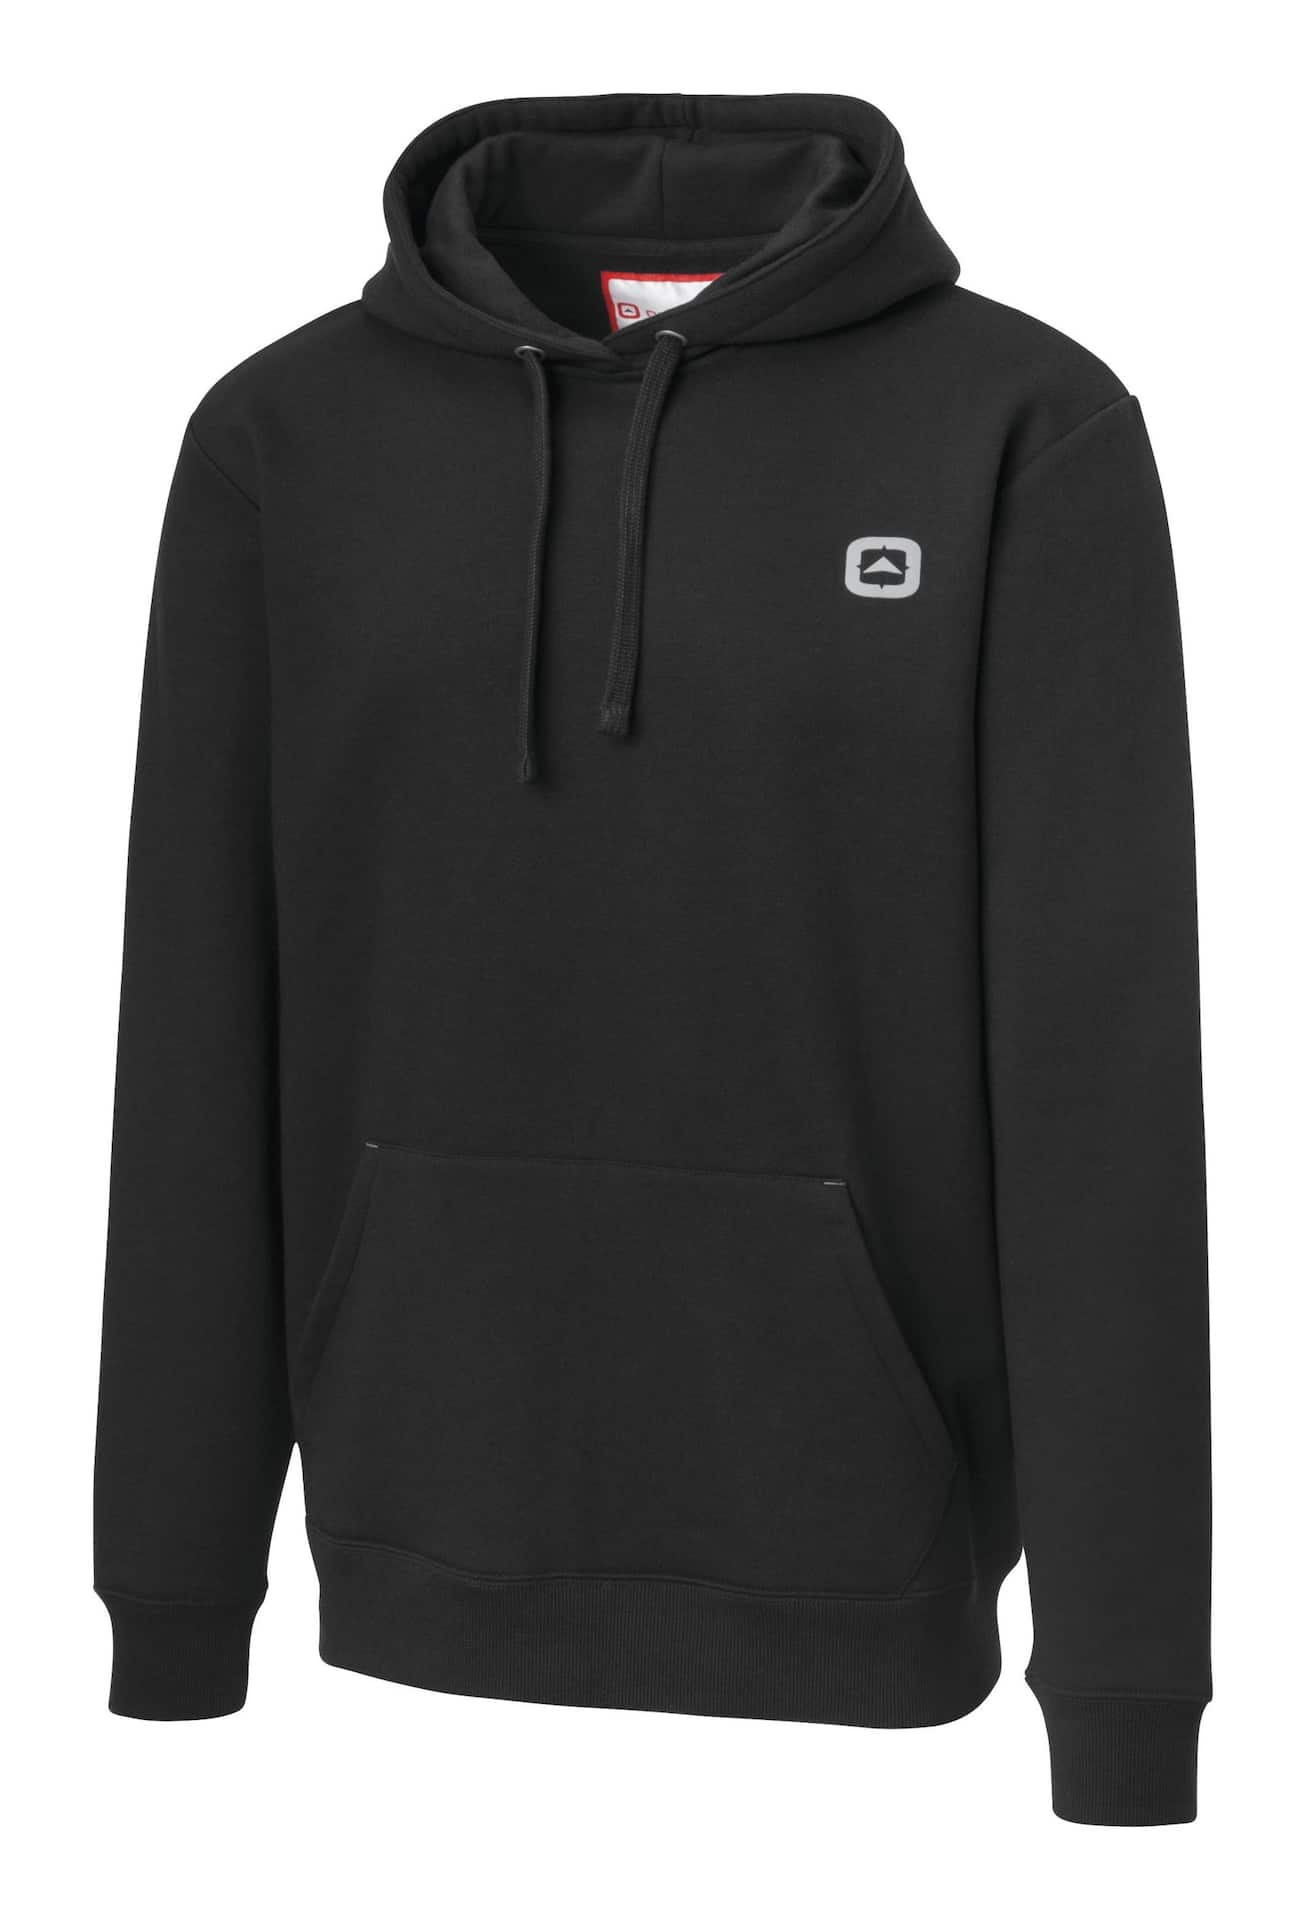 https://media-www.canadiantire.ca/product/playing/footwear-apparel/winter-footwear-apparel/1872305/outbound-men-s-jamison-hoody-black-s-a983a4bb-8641-4e07-bfcb-09e6f7a77c4a-jpgrendition.jpg